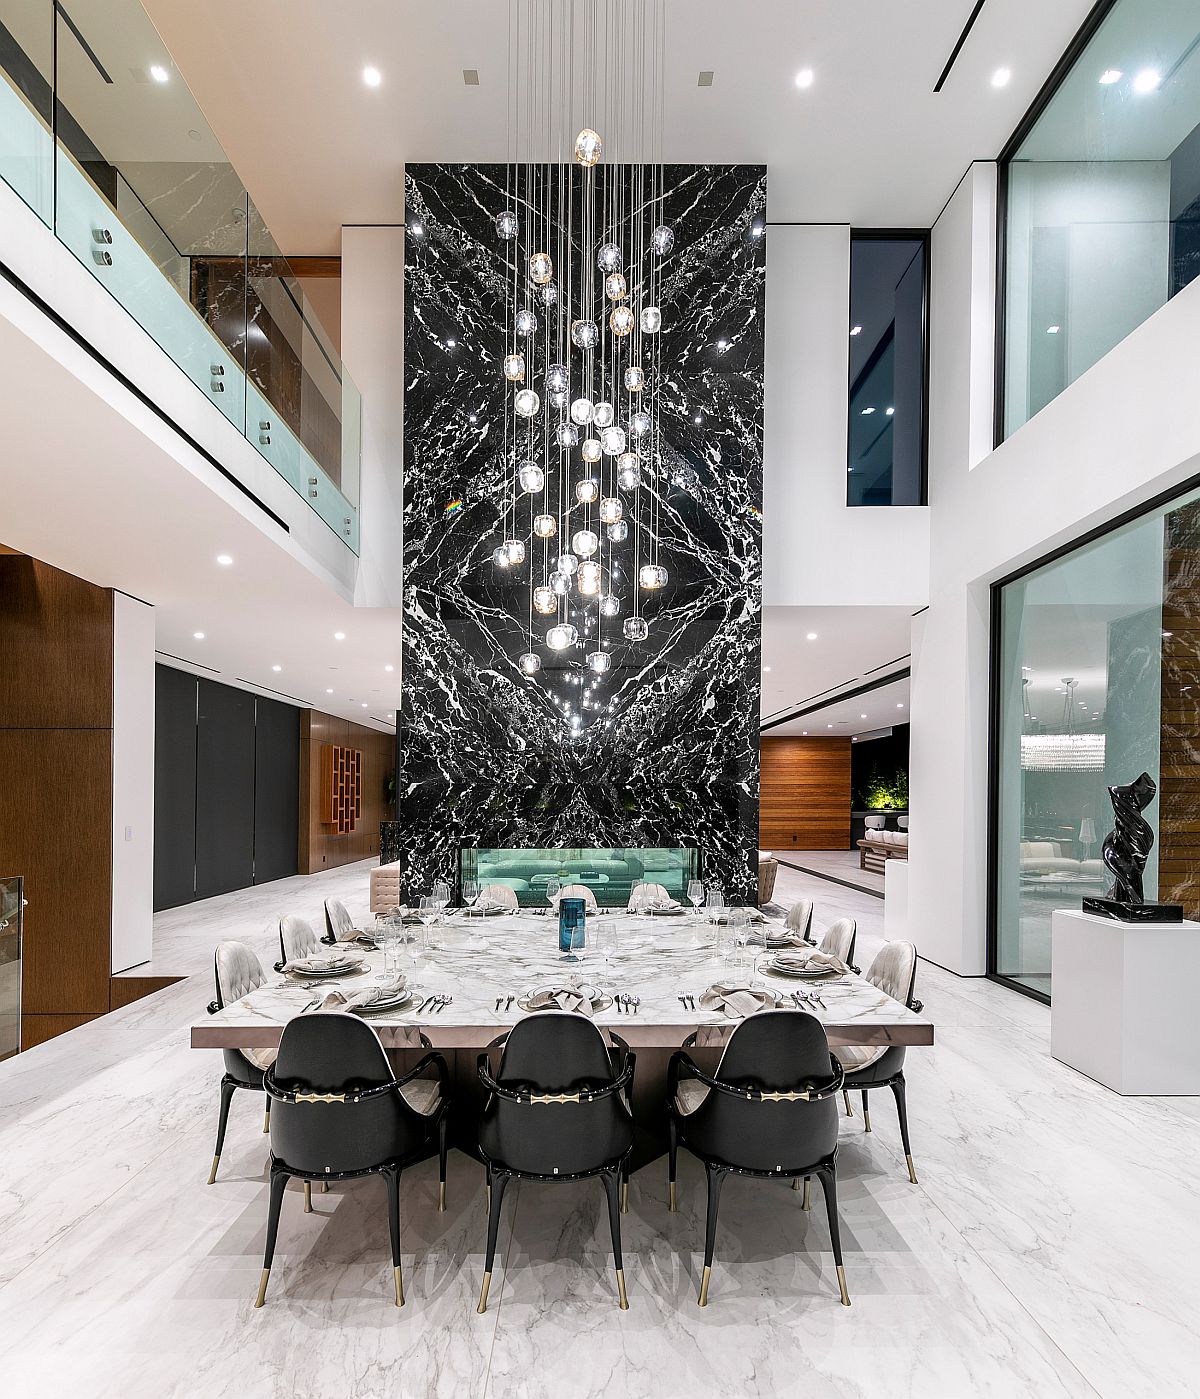 Mesmerizing-marble-fireplae-coupled-with-stunning-chandelier-in-the-dining-space-58754